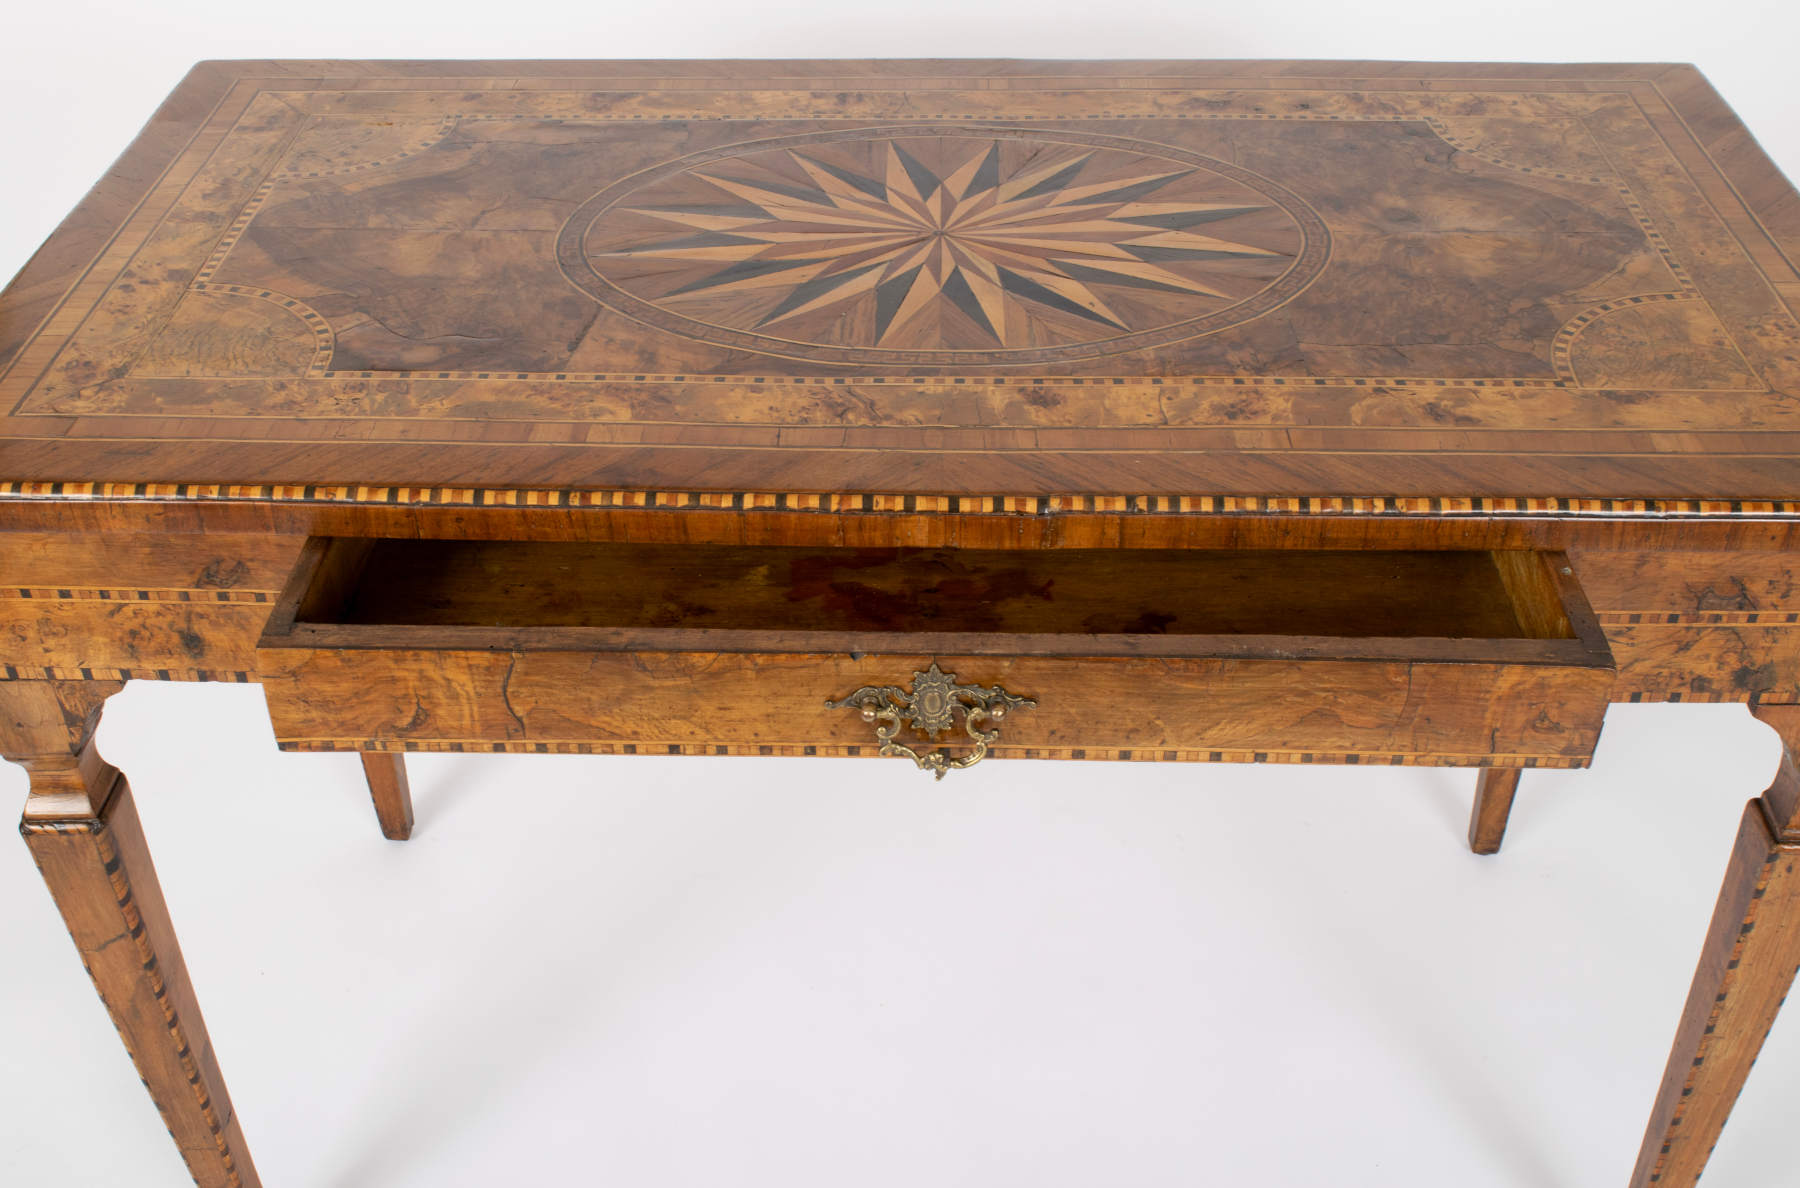 Pair of Italian Parquetry Side Tables, c. 1780